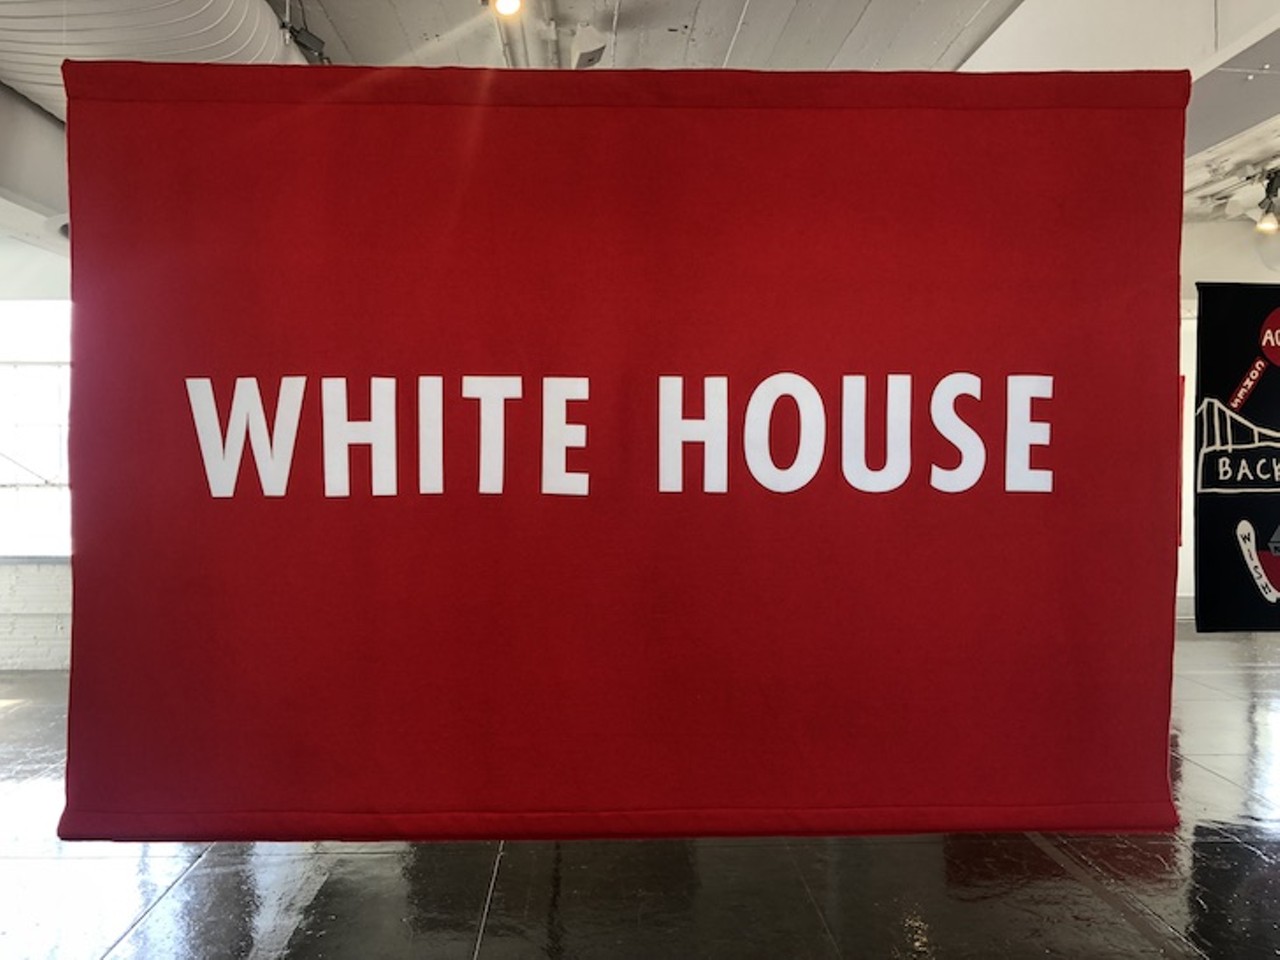 A Virtual Tour of Artpace's Politically Charged Exhibition "Word on the Street"